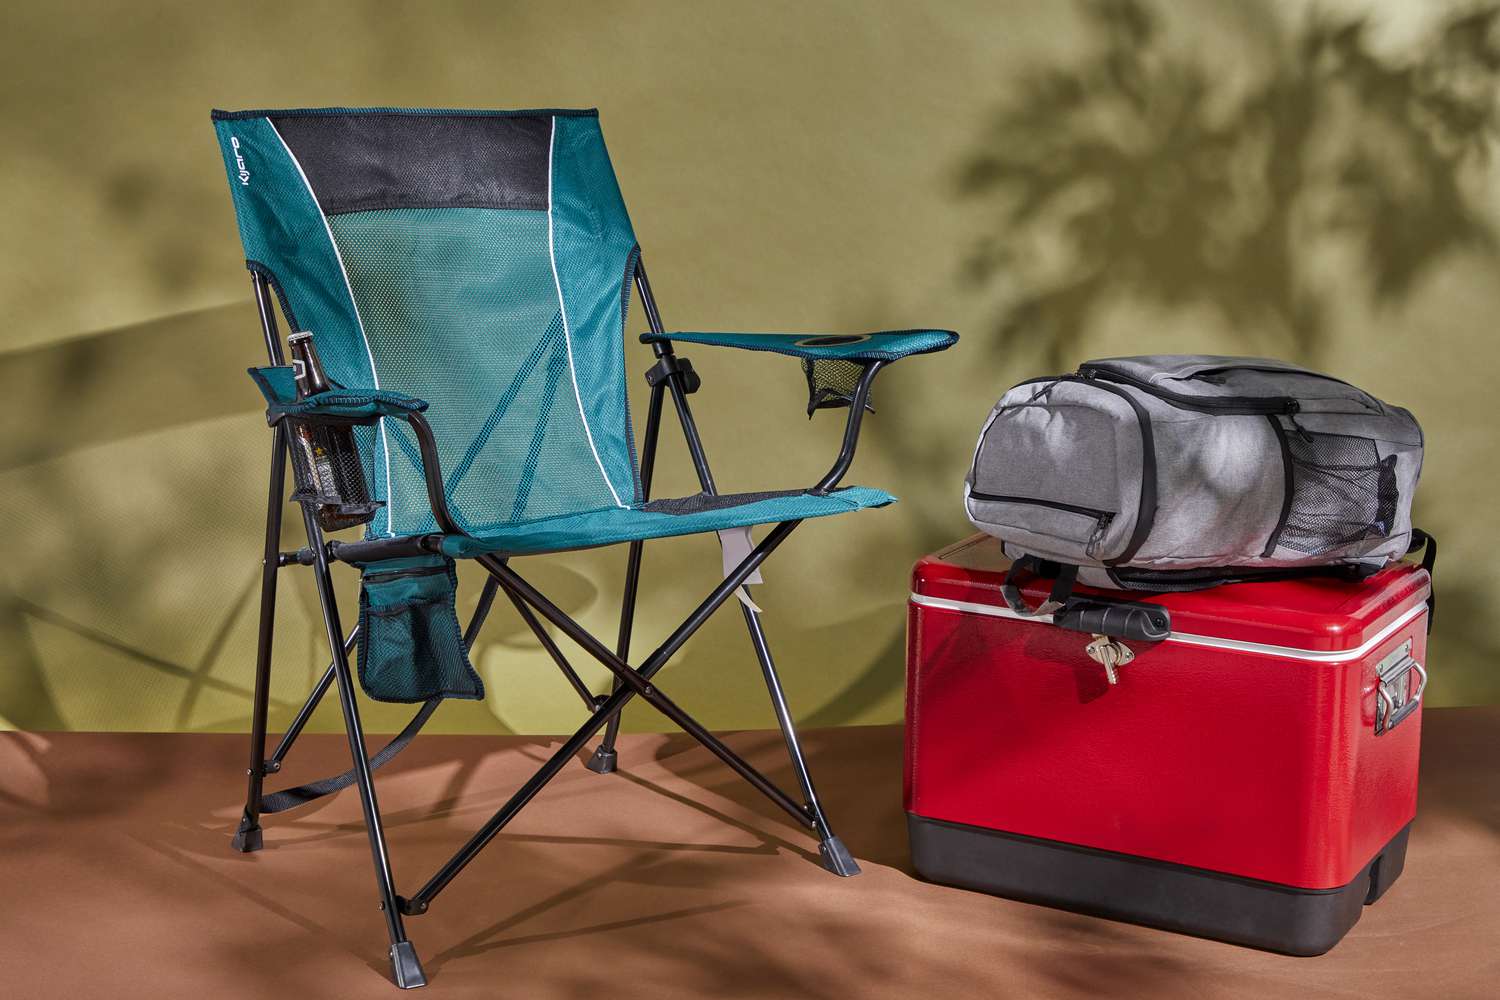 How to Clean Camp Chairs: 5 Simple Steps.